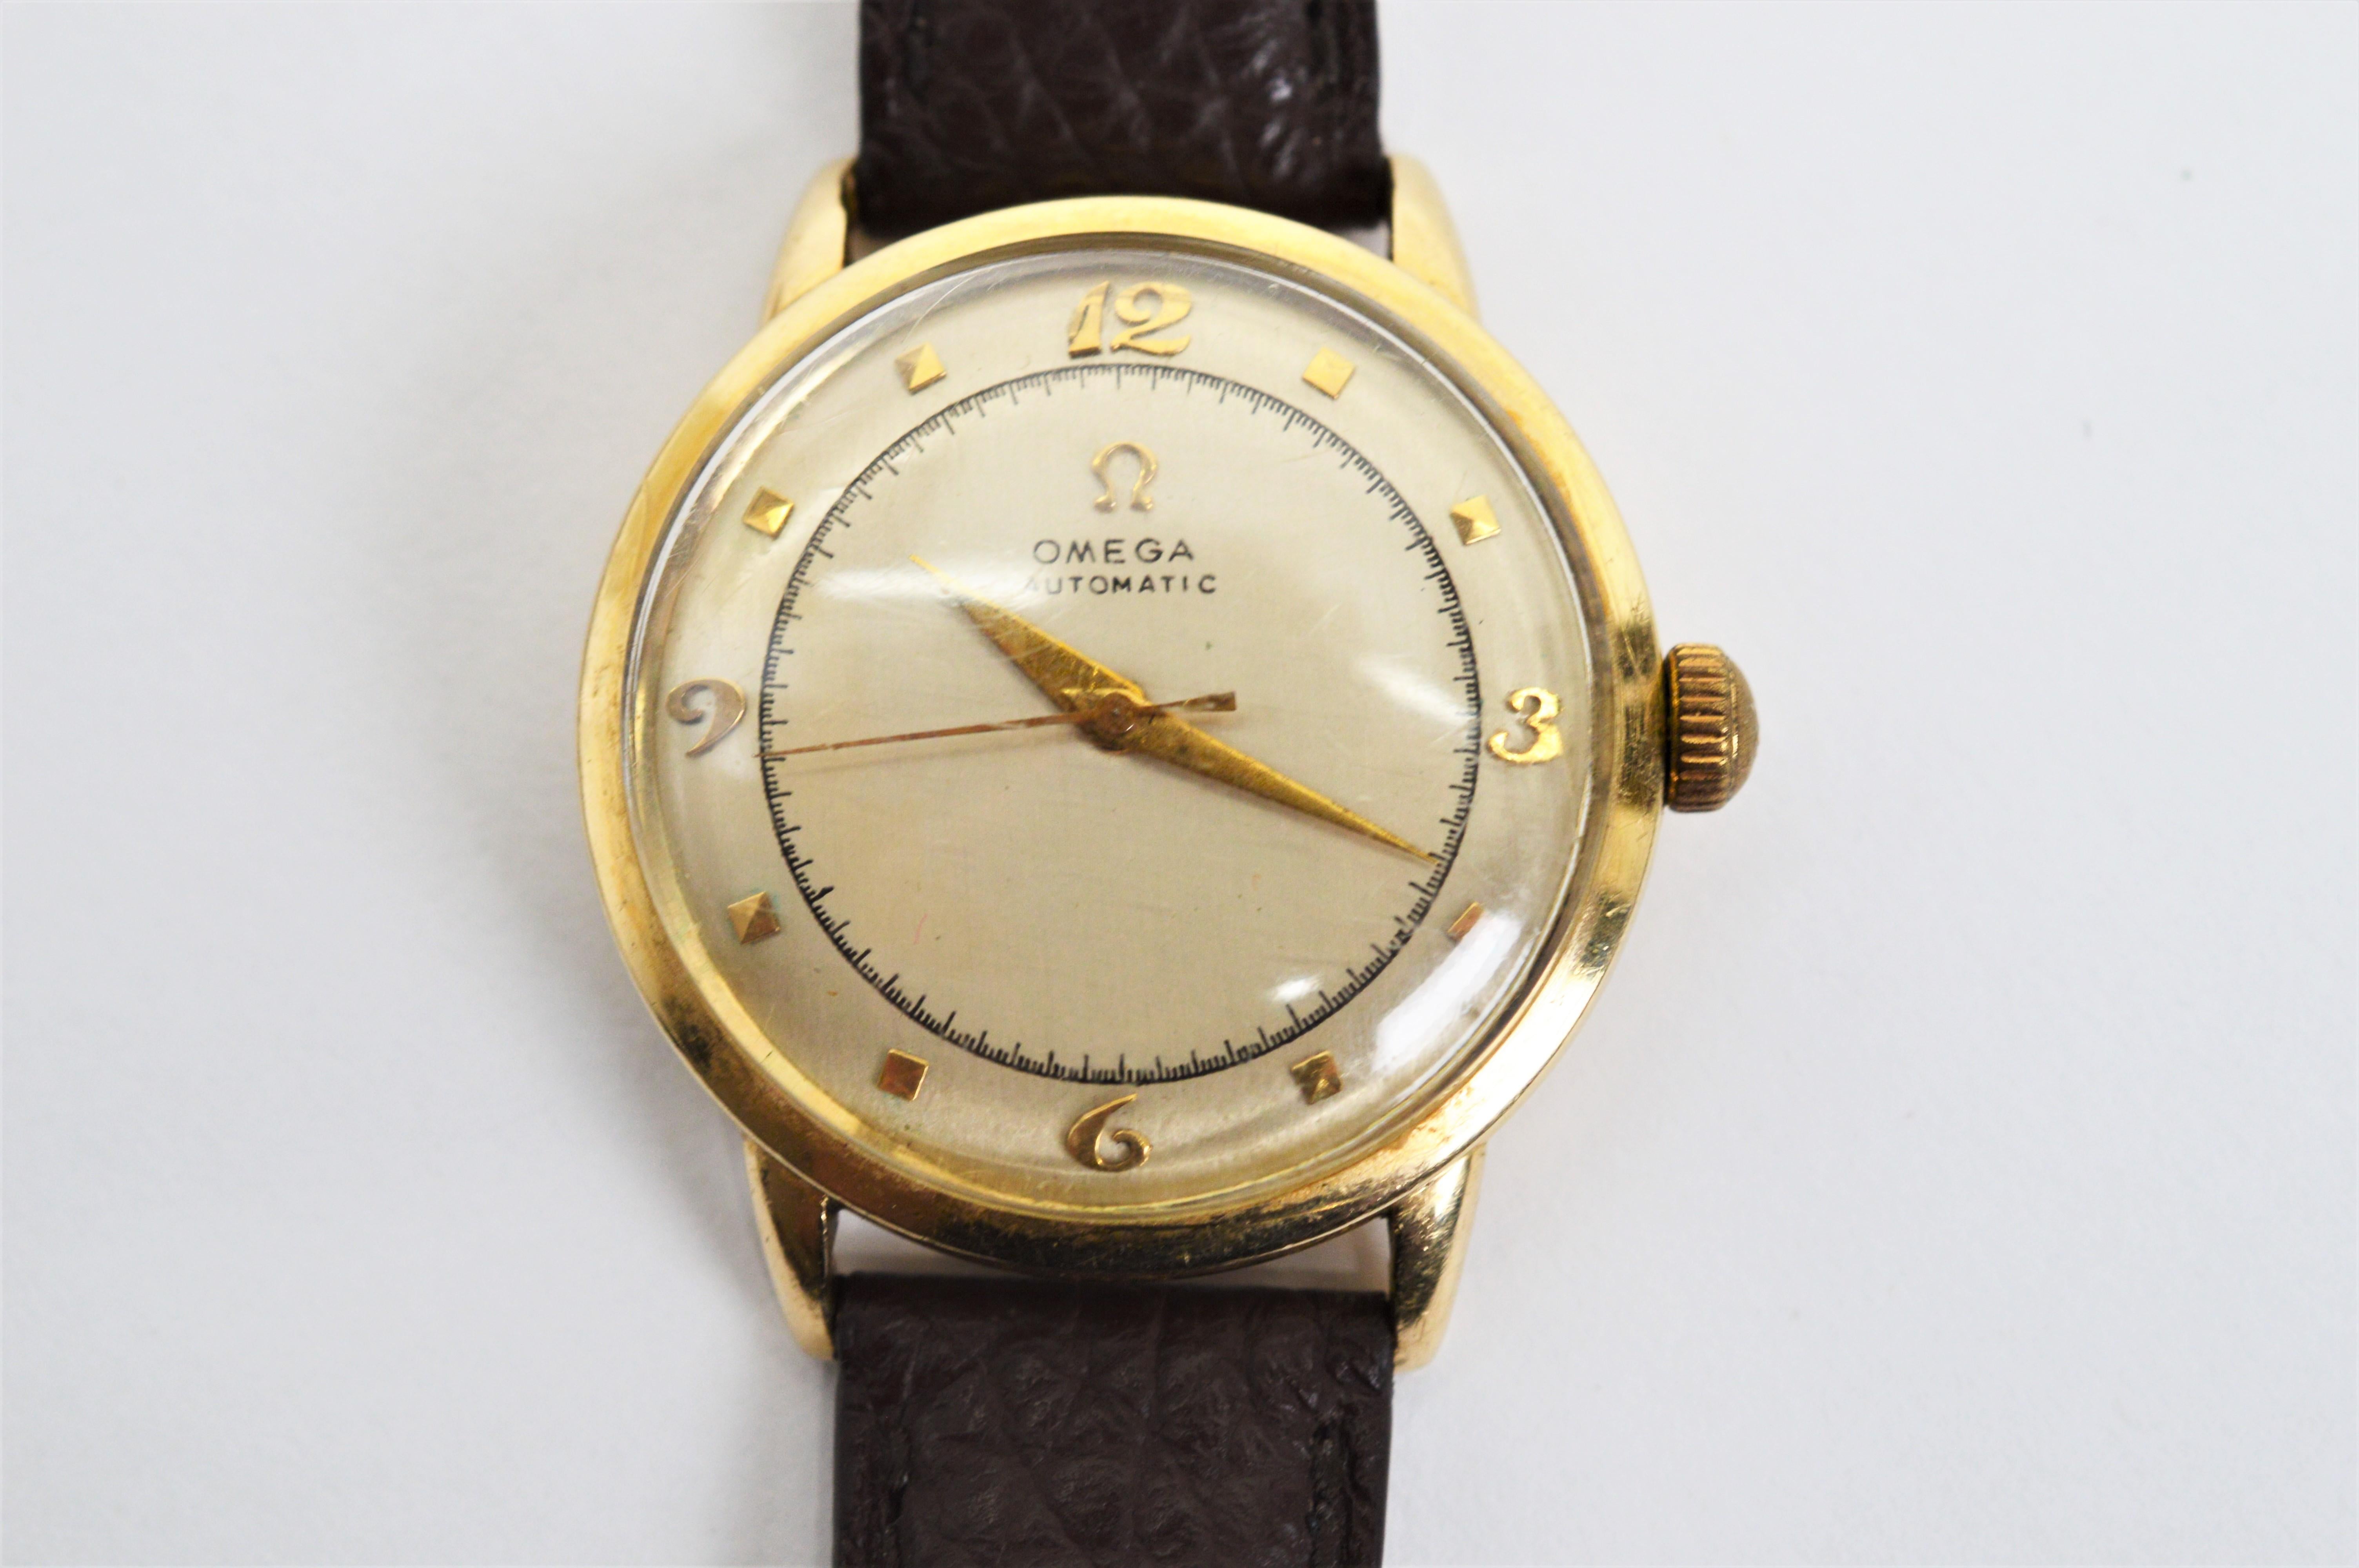 In the popular 32mm case of the period, this great 1950s Omega timepiece is a winner.  In original condition, the domed crystal and authentic retro dial with rounded numerals and second sweep dial are its signature. Sometimes called a bumper watch